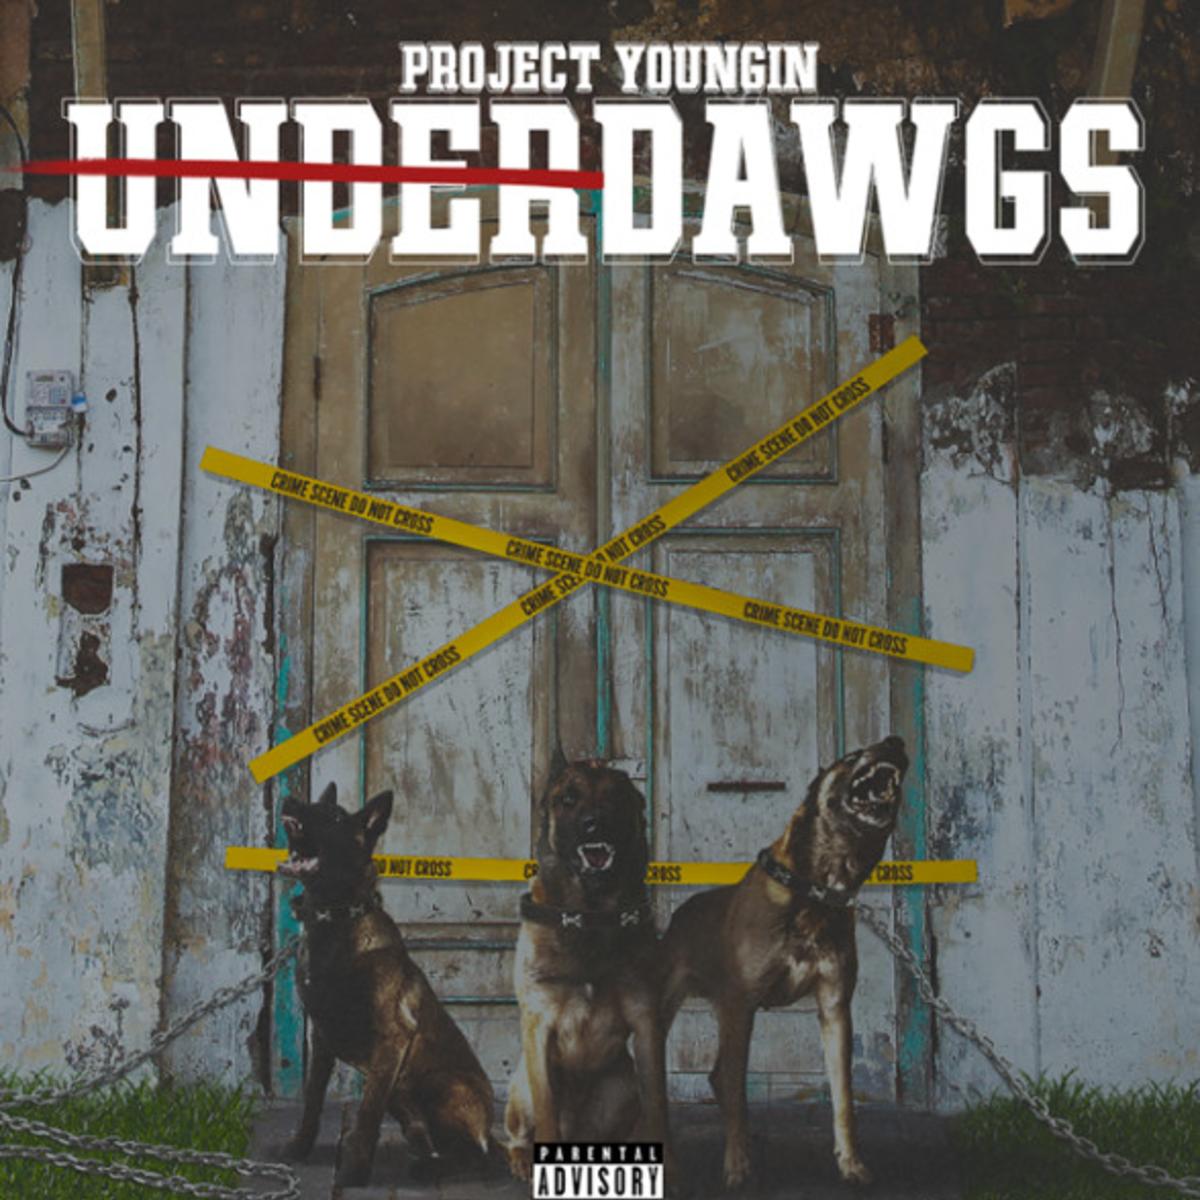 DOWNLOAD MP3: Project Youngin - Underdawgs